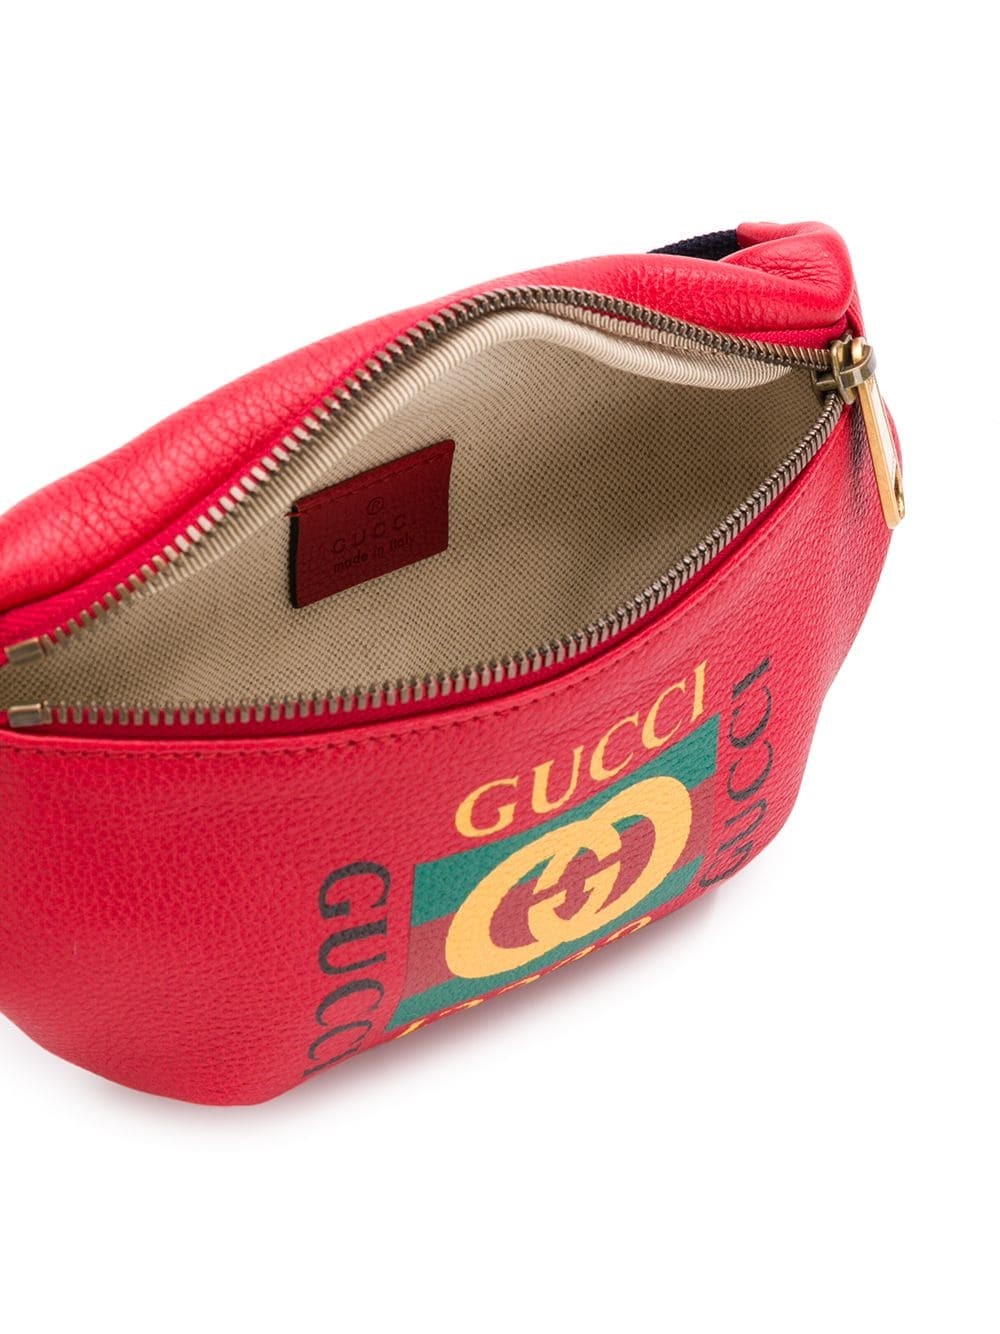 gucci LOGO BELT BAG available on 0 - 25322